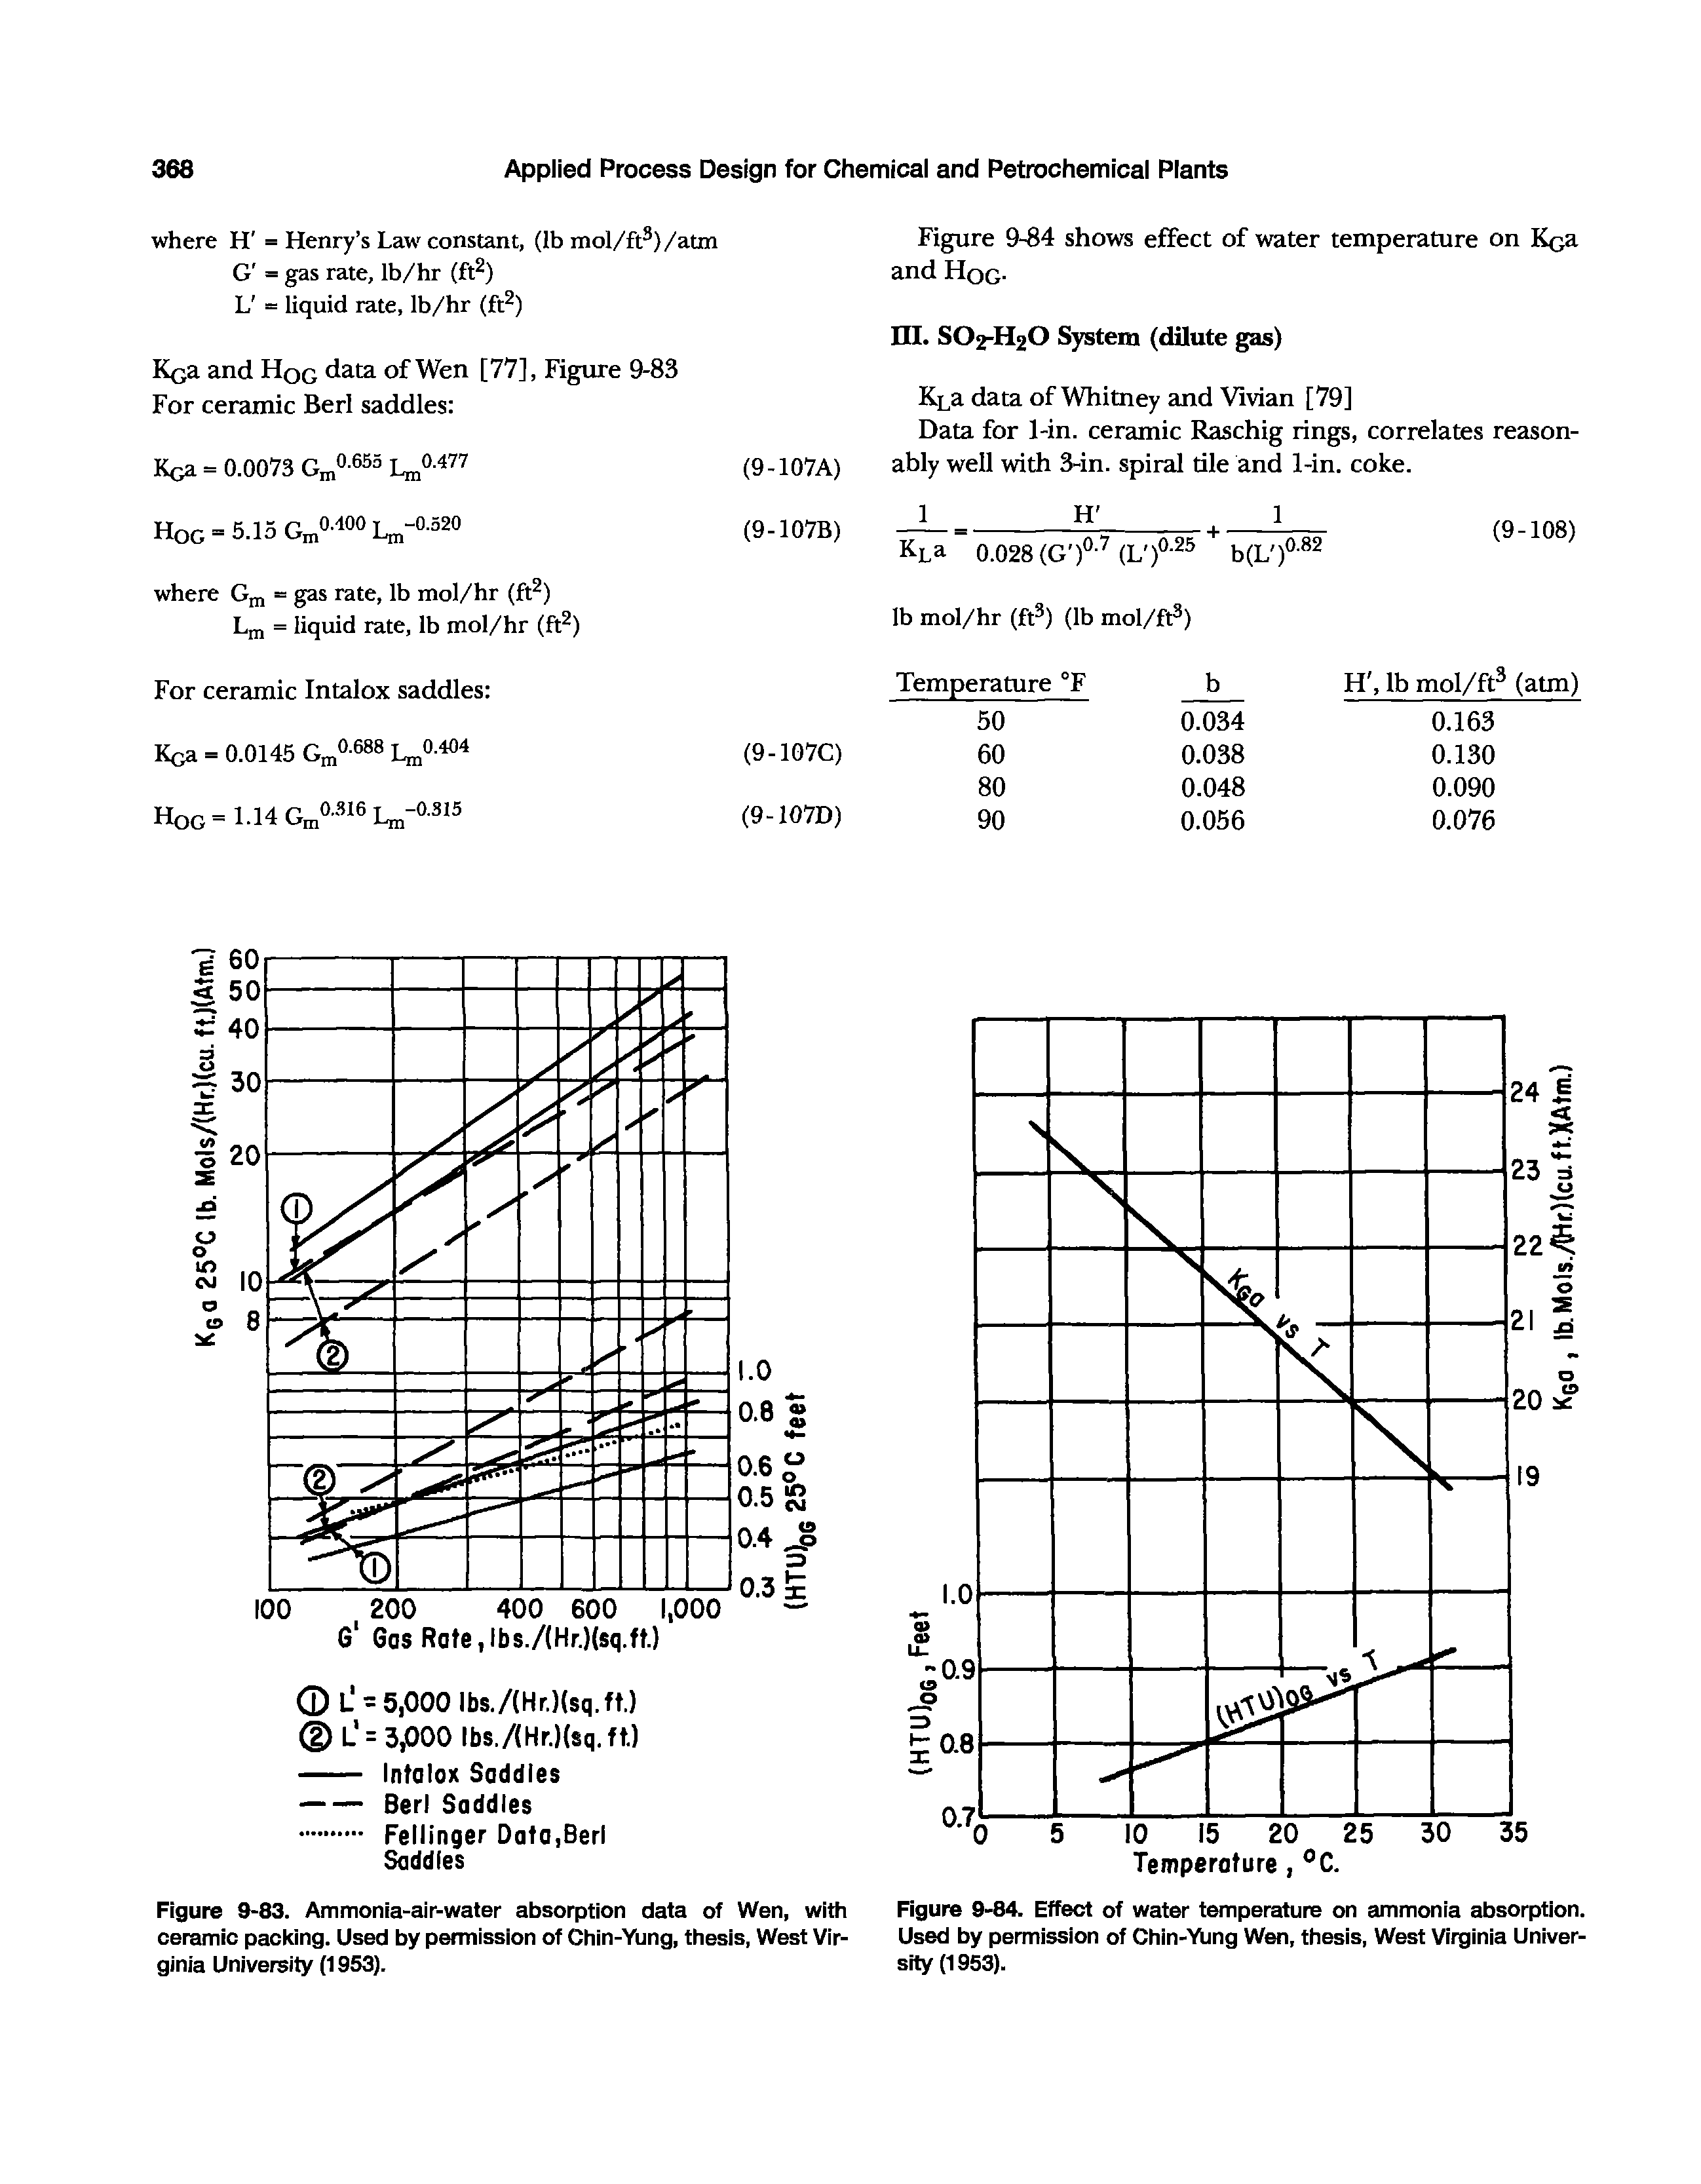 Figure 9-83. Ammonia-air-water absorption data of Wen, with ceramic packing. Used by permission of Chin-Yung, thesis. West Virginia University (1953).